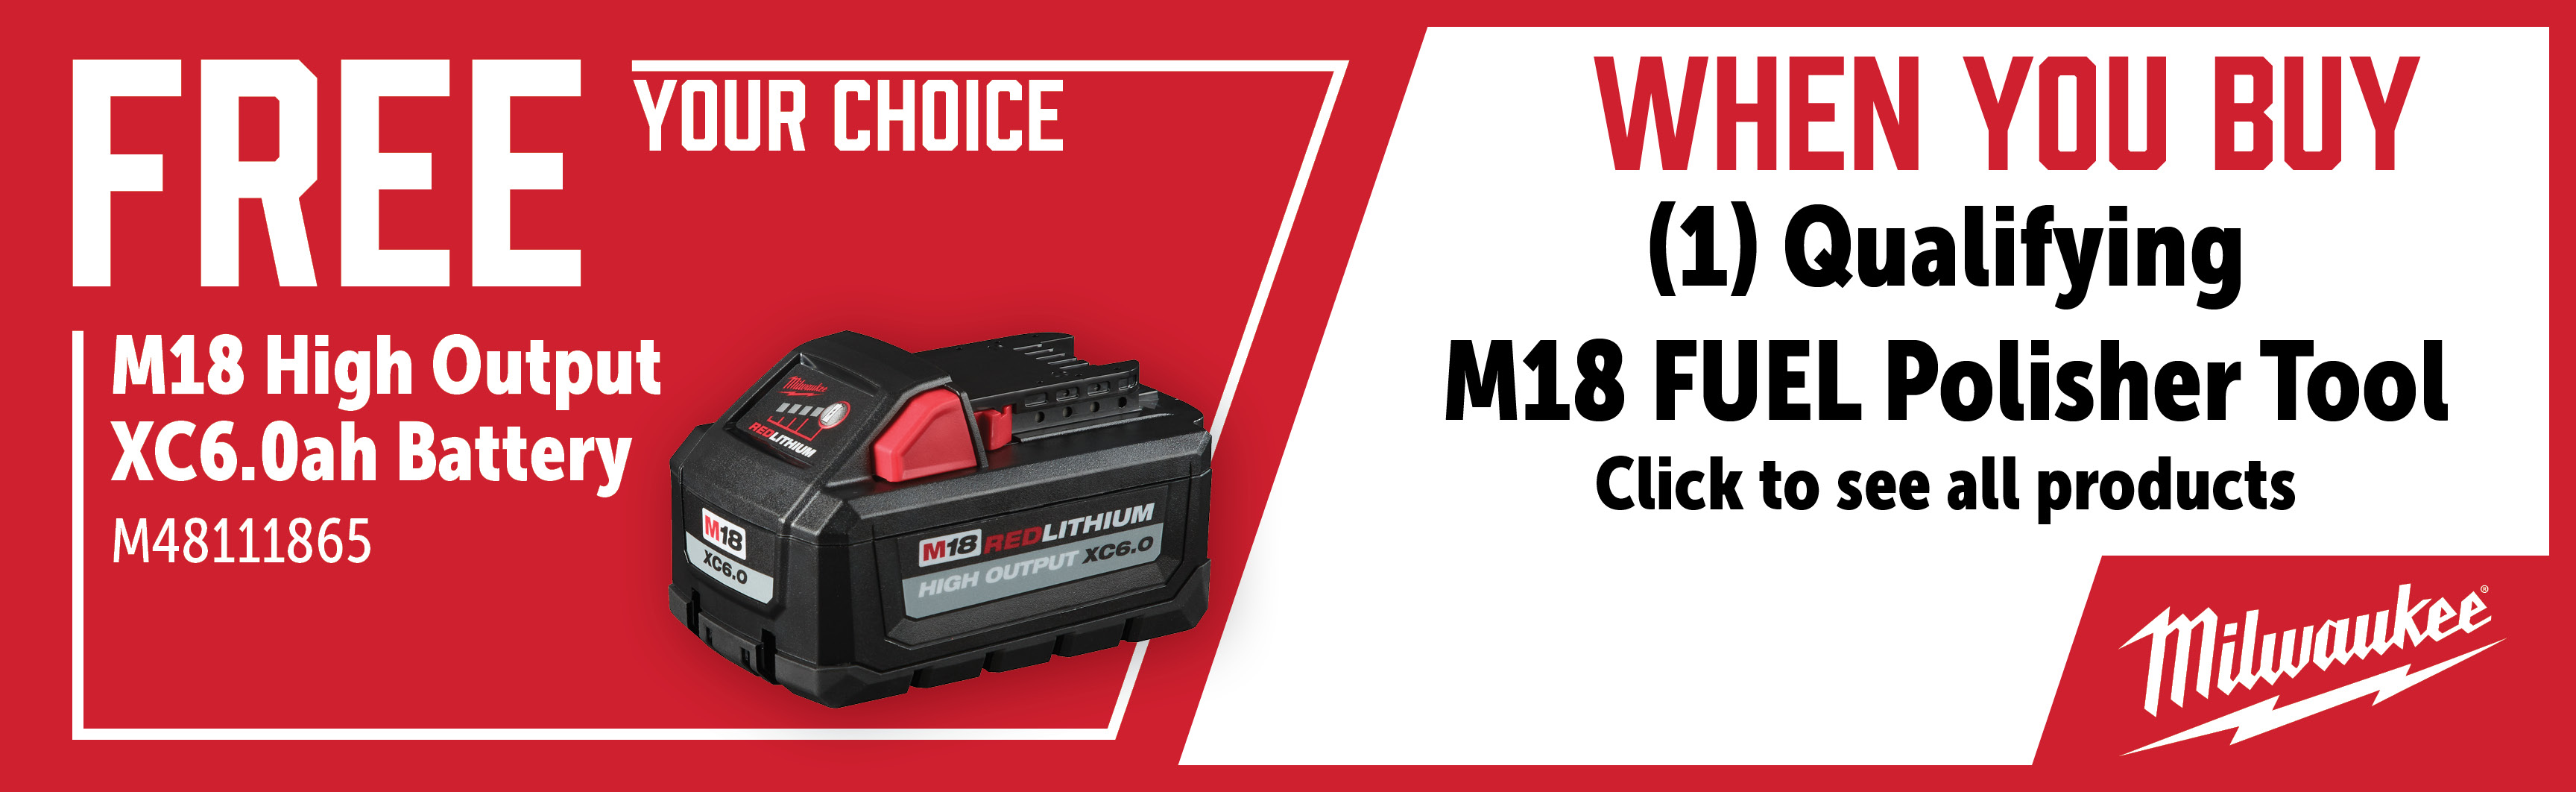 Milwaukee Feb-Apr: Buy an M18 Fuel Polisher Bare Tool and Get a FREE M4811165